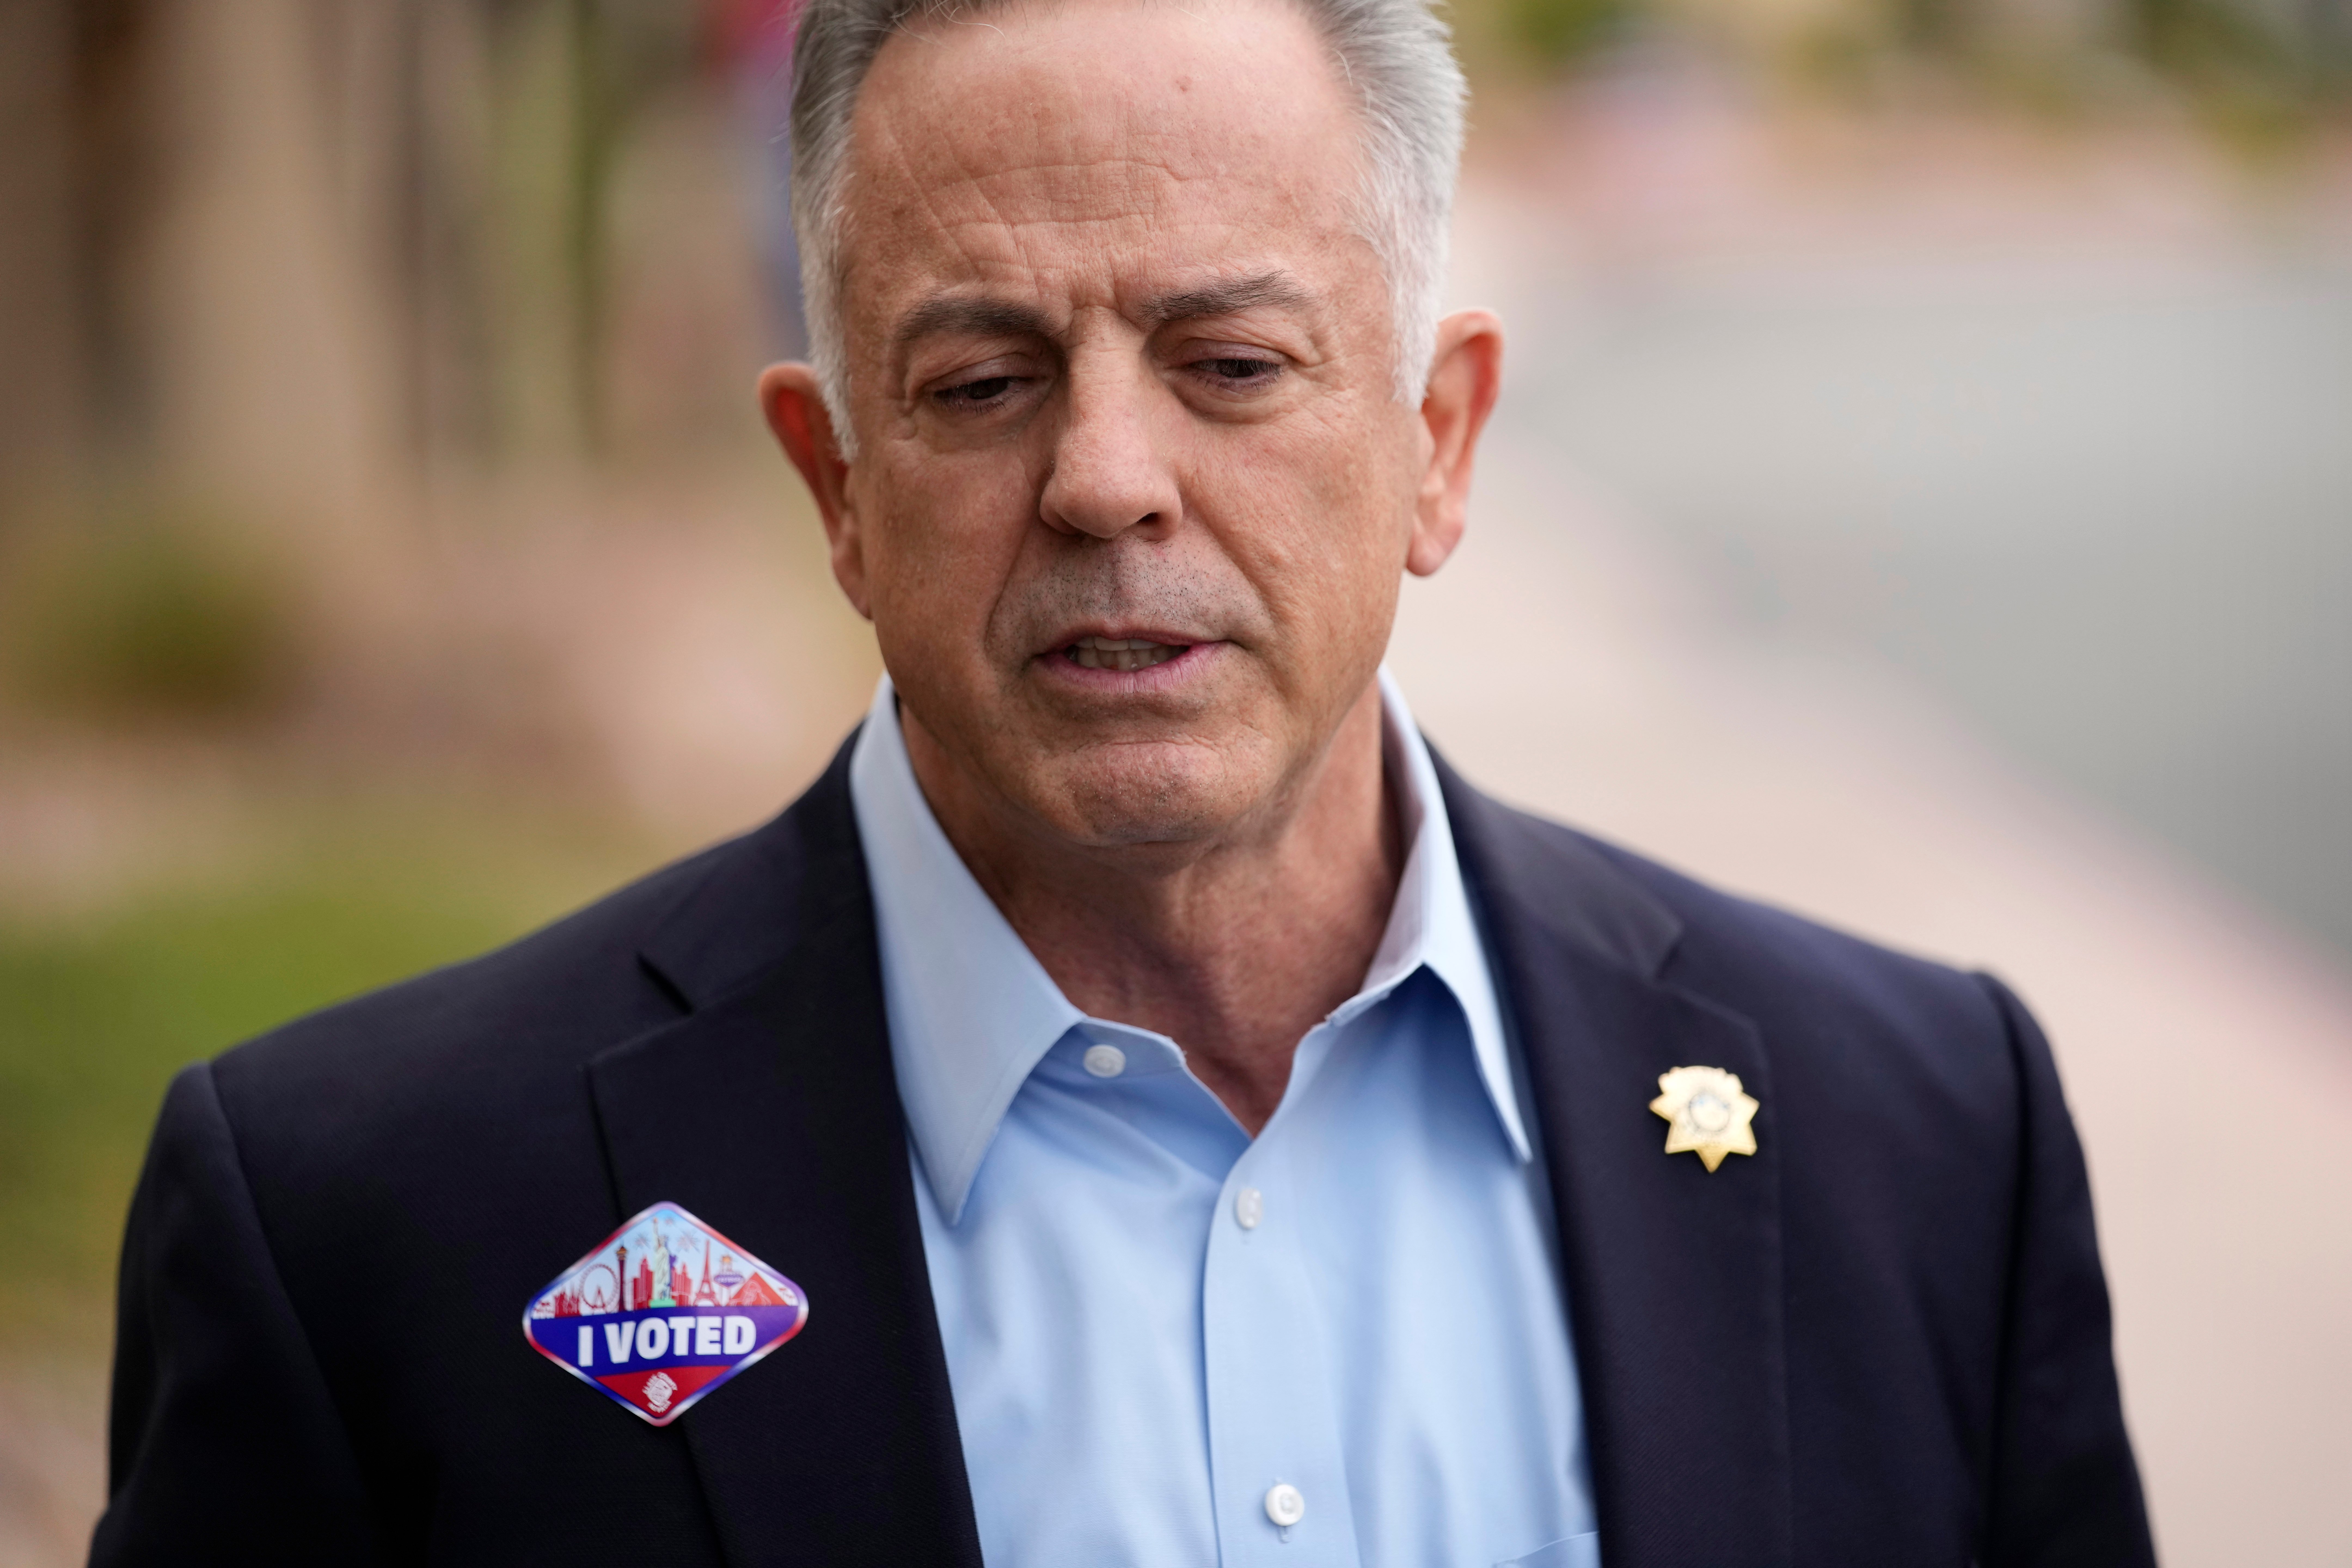 FILE - Joe Lombardo, Clark County sheriff and Republican candidate for Nevada governor, speaks with the media after voting, Nov. 3, 2022, in Las Vegas. In late September 2023, Lombardo filed a lawsuit challenging the state ethics commission’s authority to censure and fine the former Clark County sheriff for using his publicly issued sheriff’s badge during his 2022 gubernatorial campaign. (AP Photo/John Locher, File)